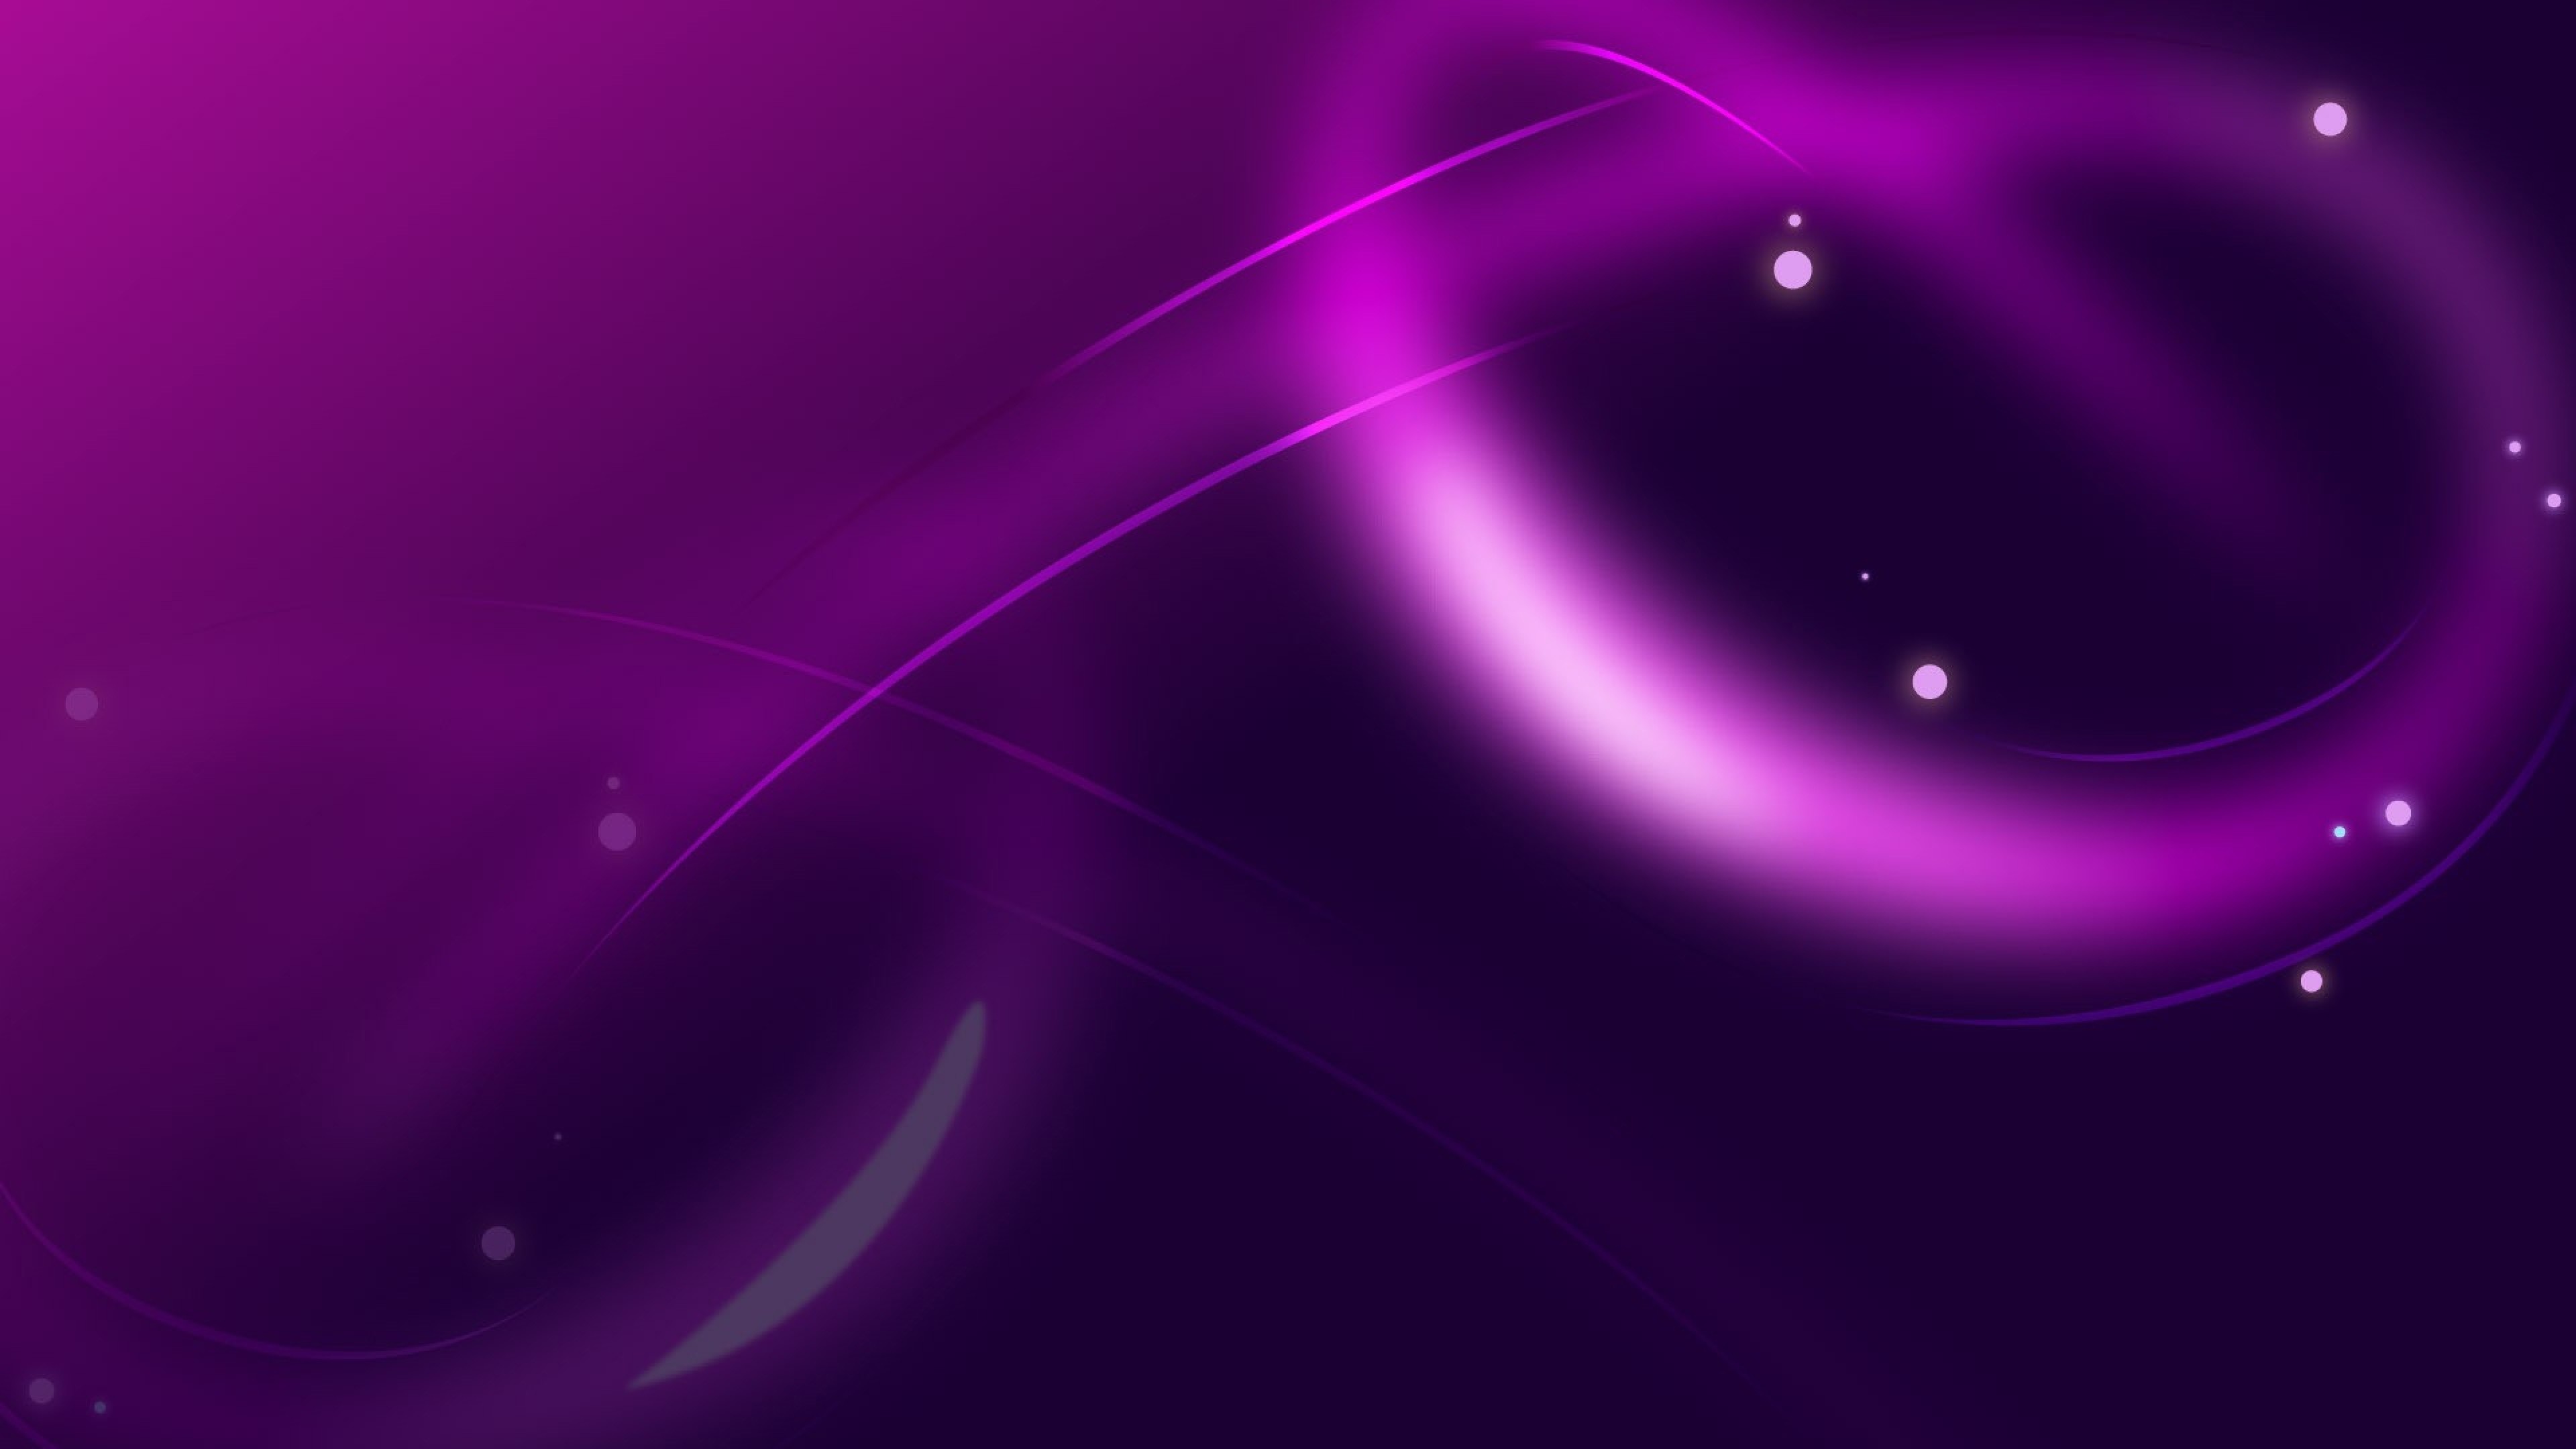 3840x2160 Abstract Violet Wallpaper Background 8331